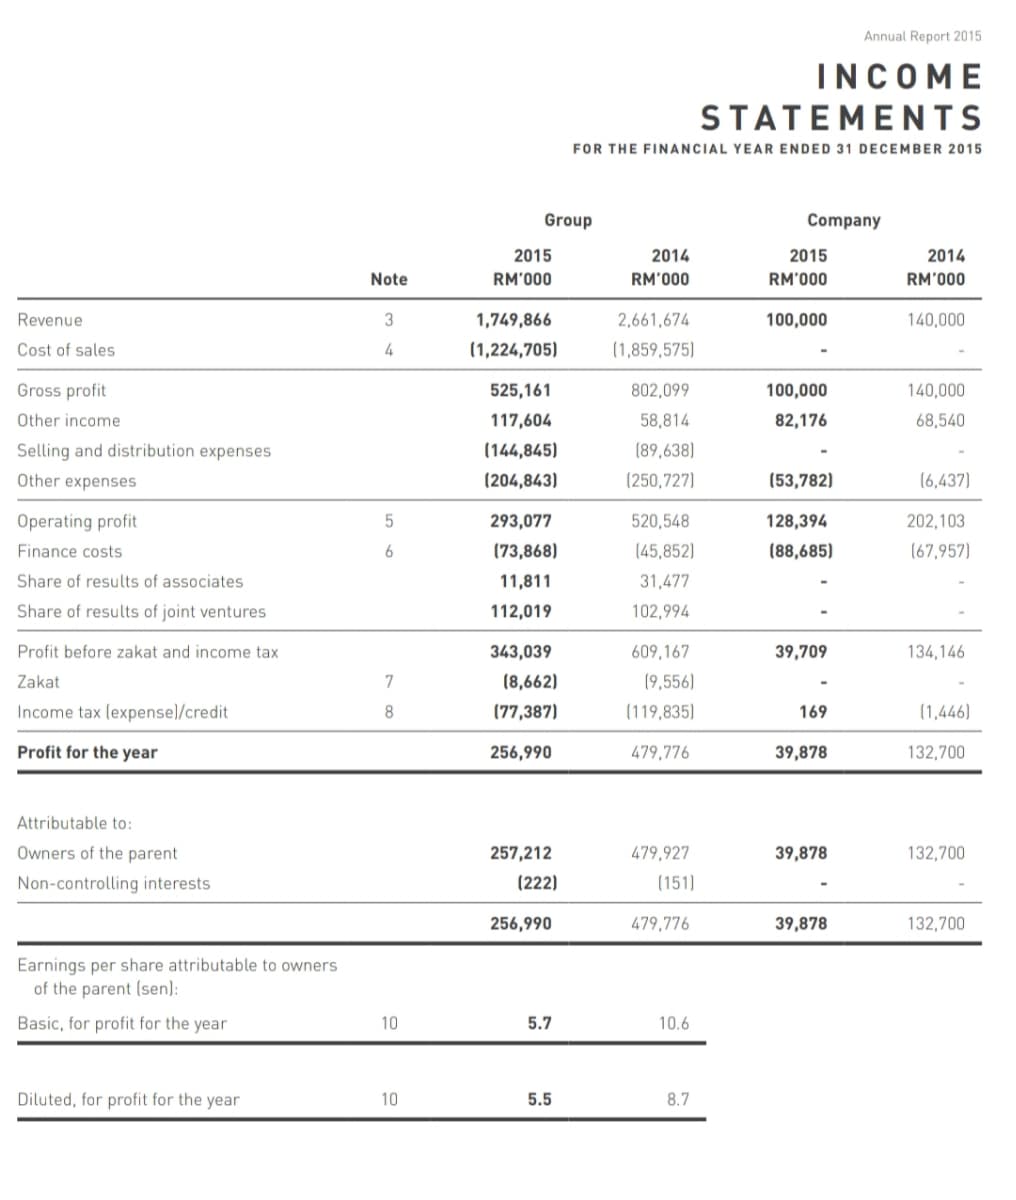 Annual Report 2015
INCOME
STATEMENTS
FOR THE FINANCIAL YEAR ENDED 31 DECEMBER 2015
Group
Company
2015
2014
2015
2014
Note
RM'000
RM'000
RM'000
RM'000
Revenue
3
1,749,866
2,661,674
100,000
140,000
Cost of sales
4
(1,224,705)
(1,859,575)
Gross profit
525,161
802,099
100,000
140,000
Other income
117,604
58,814
82,176
68,540
Selling and distribution expenses
(144,845)
(89,638)
Other expenses
(204,843)
(250,727)
(53,782)
(6,437)
Operating profit
293,077
520,548
128,394
202,103
Finance costs
(73,868)
(45,852)
(88,685)
(67,957)
Share of results of associates
11,811
31,477
Share of results of joint ventures
112,019
102,994
Profit before zakat and income tax
343,039
609,167
39,709
134,146
Zakat
7
(8,662)
(9,556)
Income tax (expensel/credit
(77,387)
(119,835)
169
(1,446)
Profit for the year
256,990
479,776
39,878
132,700
Attributable to:
Owners of the parent
257,212
479,927
39,878
132,700
Non-controlling interests
(222)
(151)
256,990
479,776
39,878
132,700
Earnings per share attributable to owners
of the parent (sen):
Basic, for profit for the year
10
5.7
10.6
Diluted, for profit for the year
10
5.5
8.7
